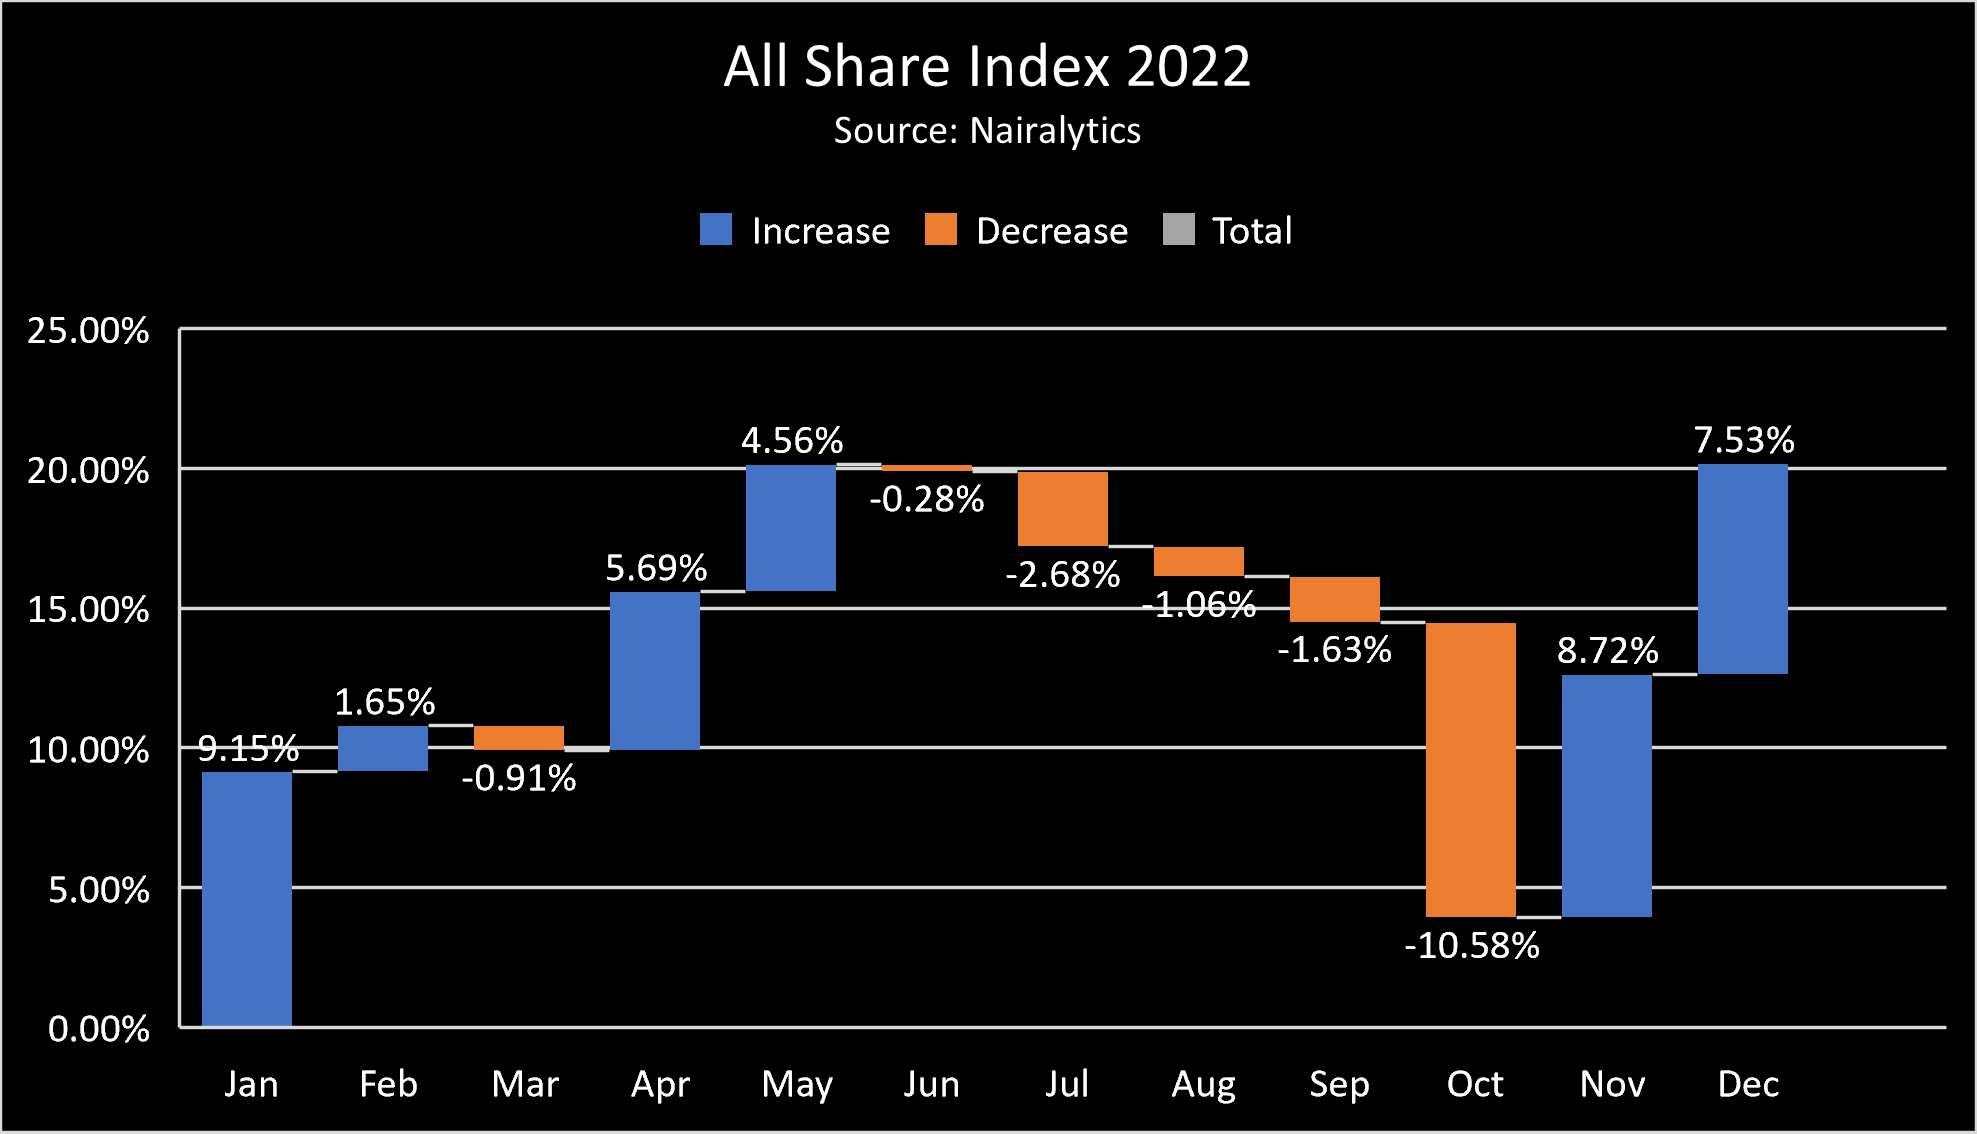 Water fall depiction of All Share Index for 2022